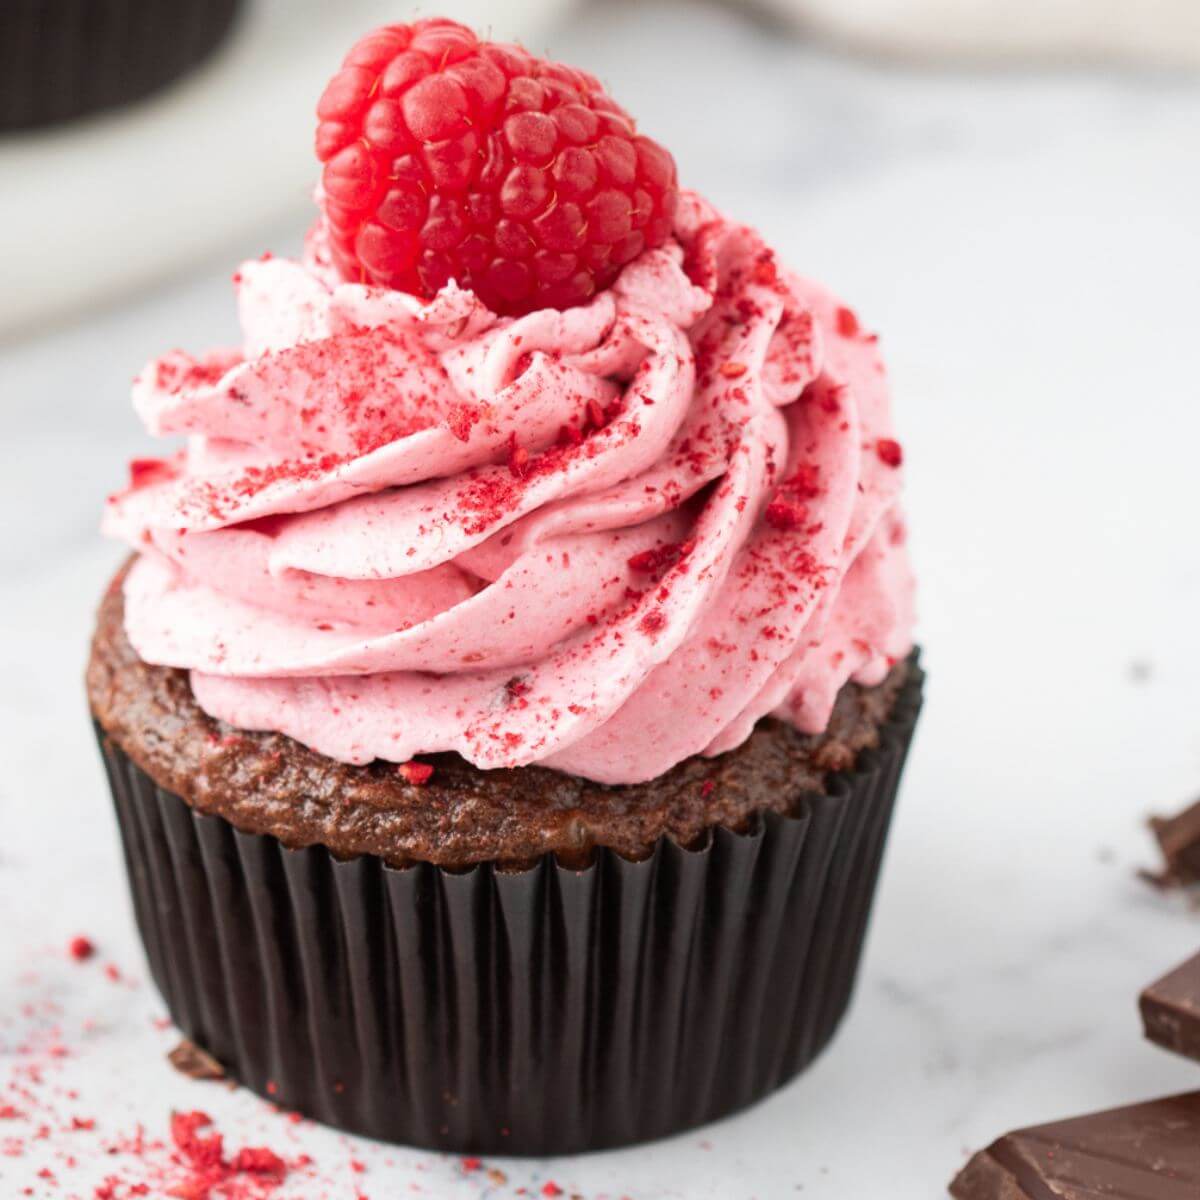 A single chocolate cupcake has double height in pink frosting on top.